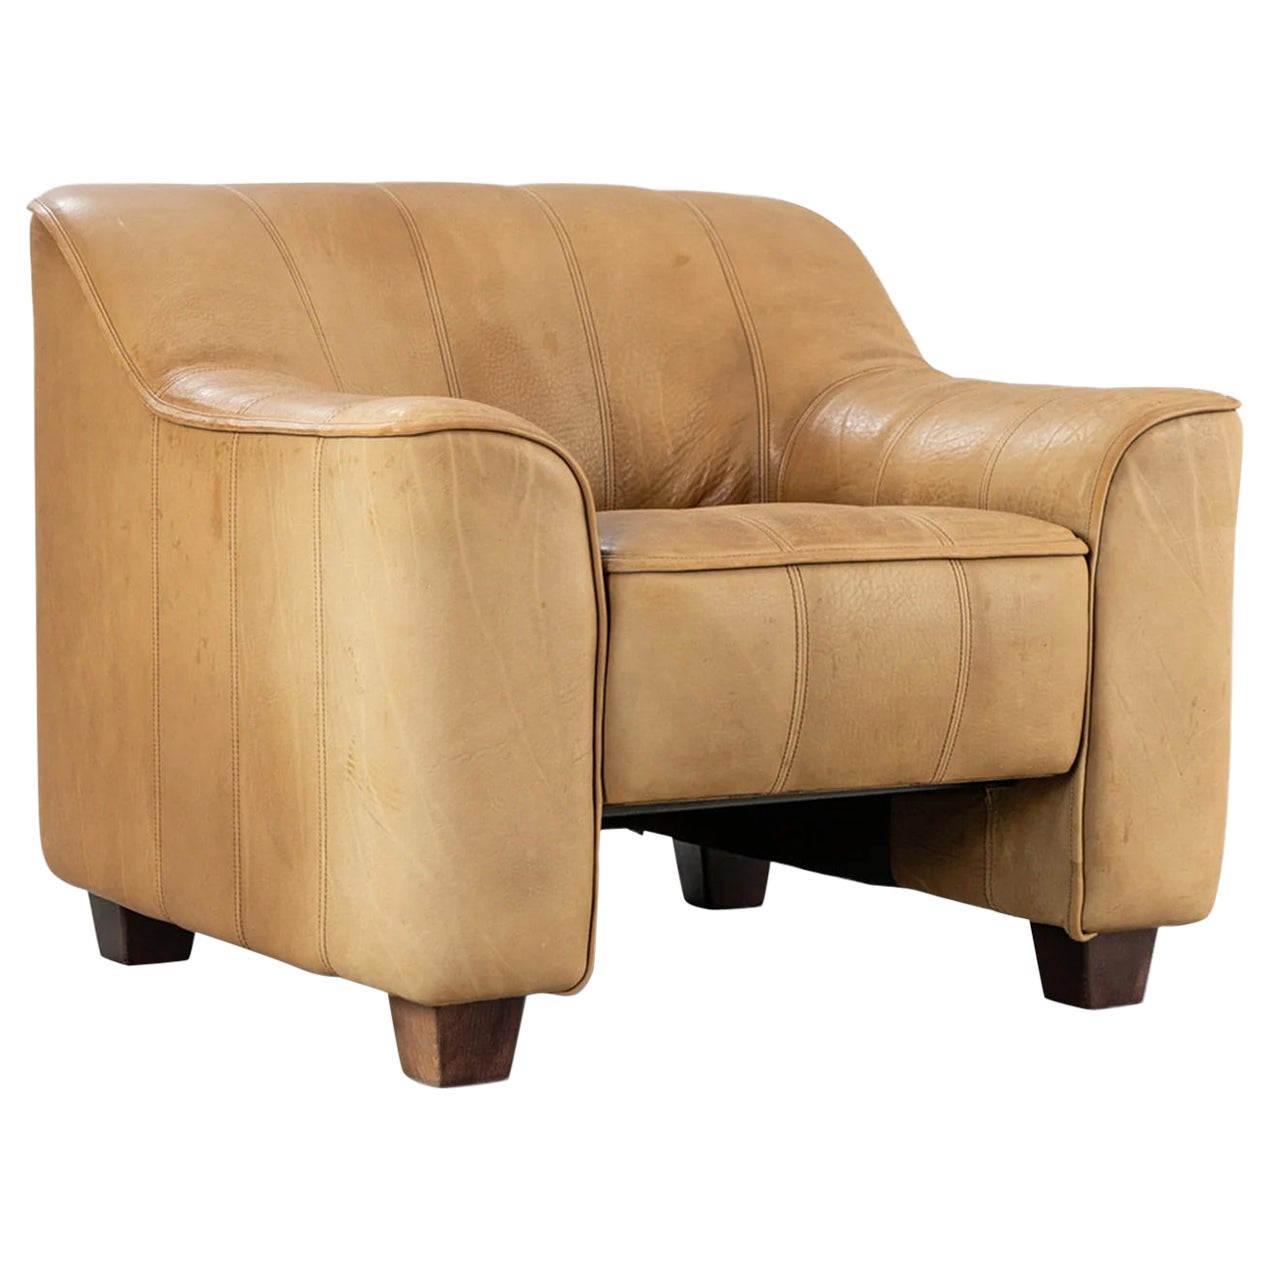 Ds 44 armchair in buffalo leather by desede For Sale